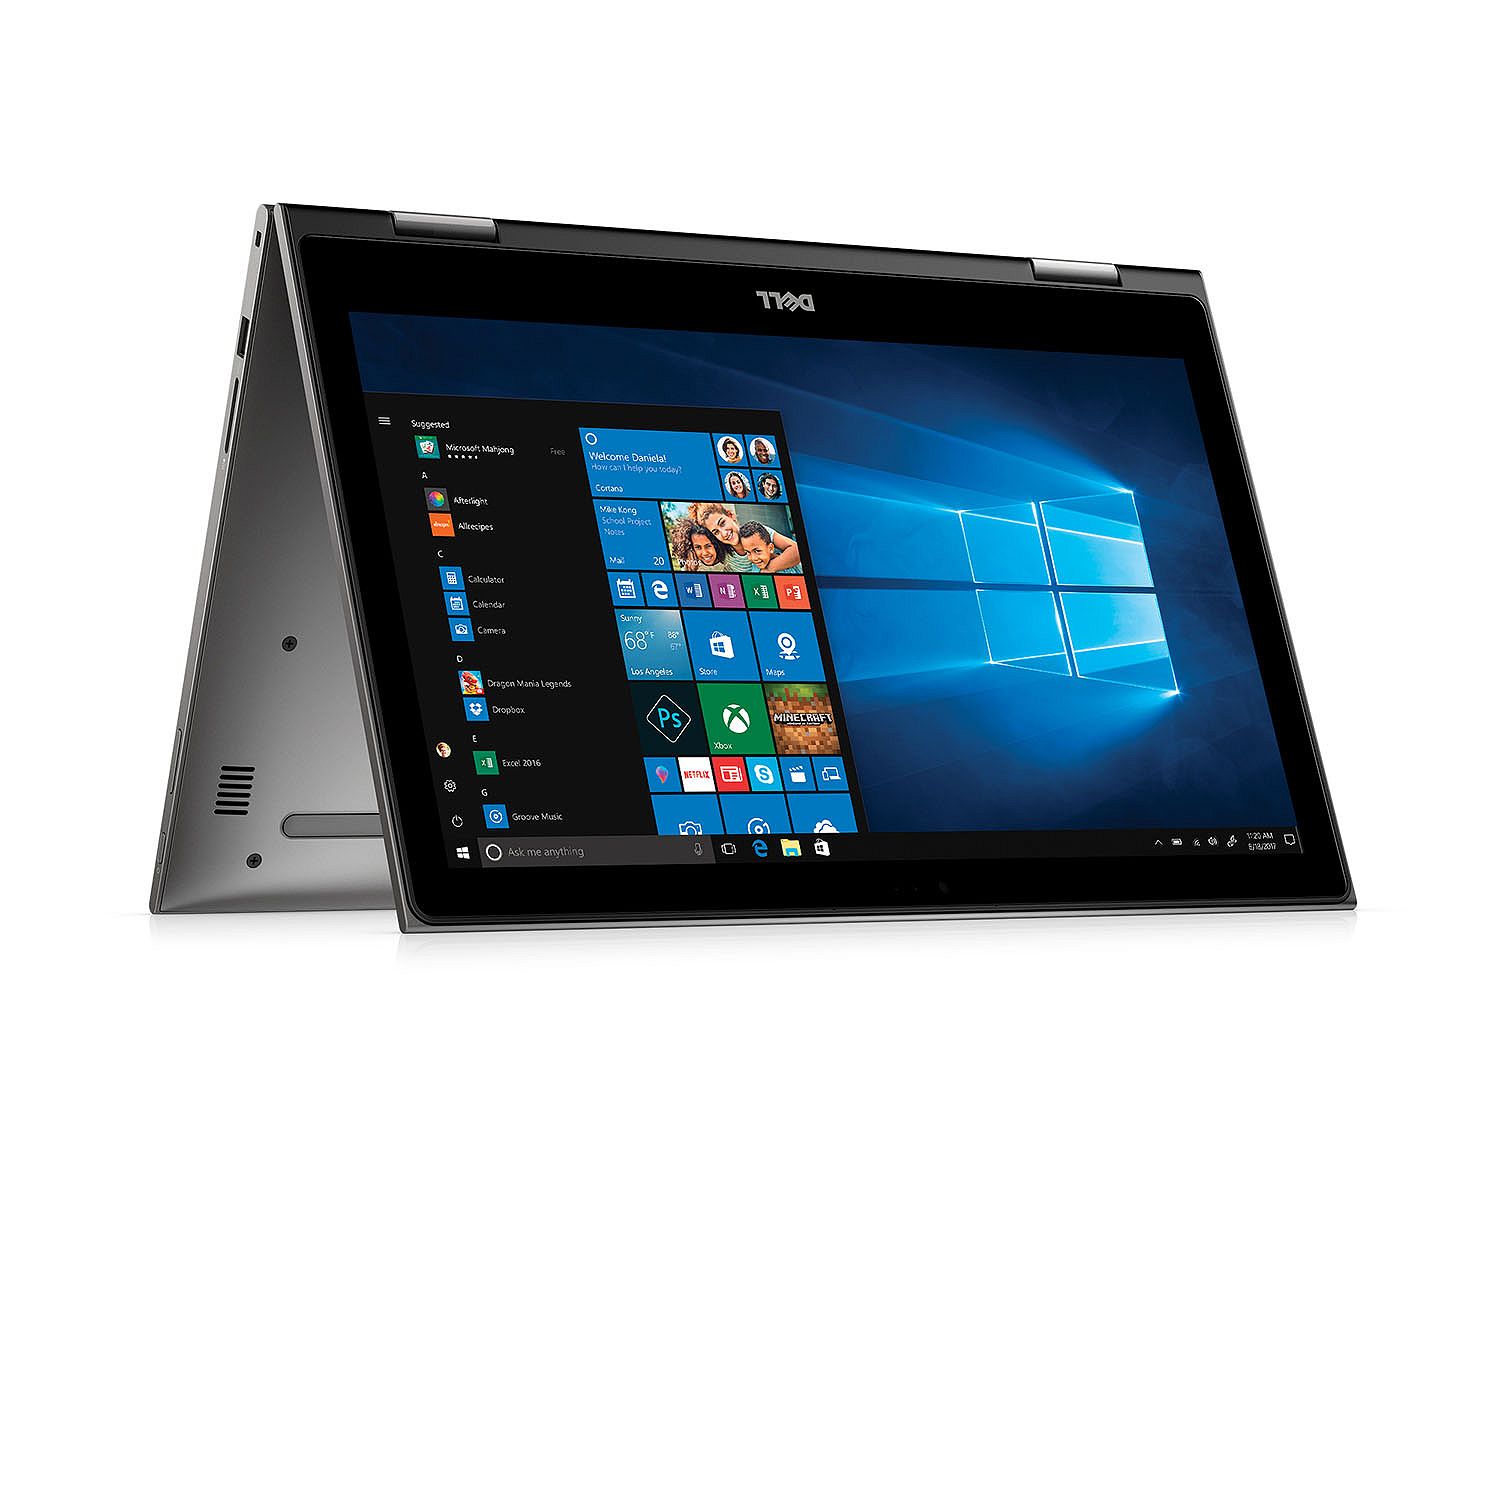 Dell Inspiron 5000 Series (i5579-7050GRY-PUS) Convertible 2-in-1 15.6″ Touch Laptop, 8th Gen Core i7, 12GB RAM, 512GB SSD